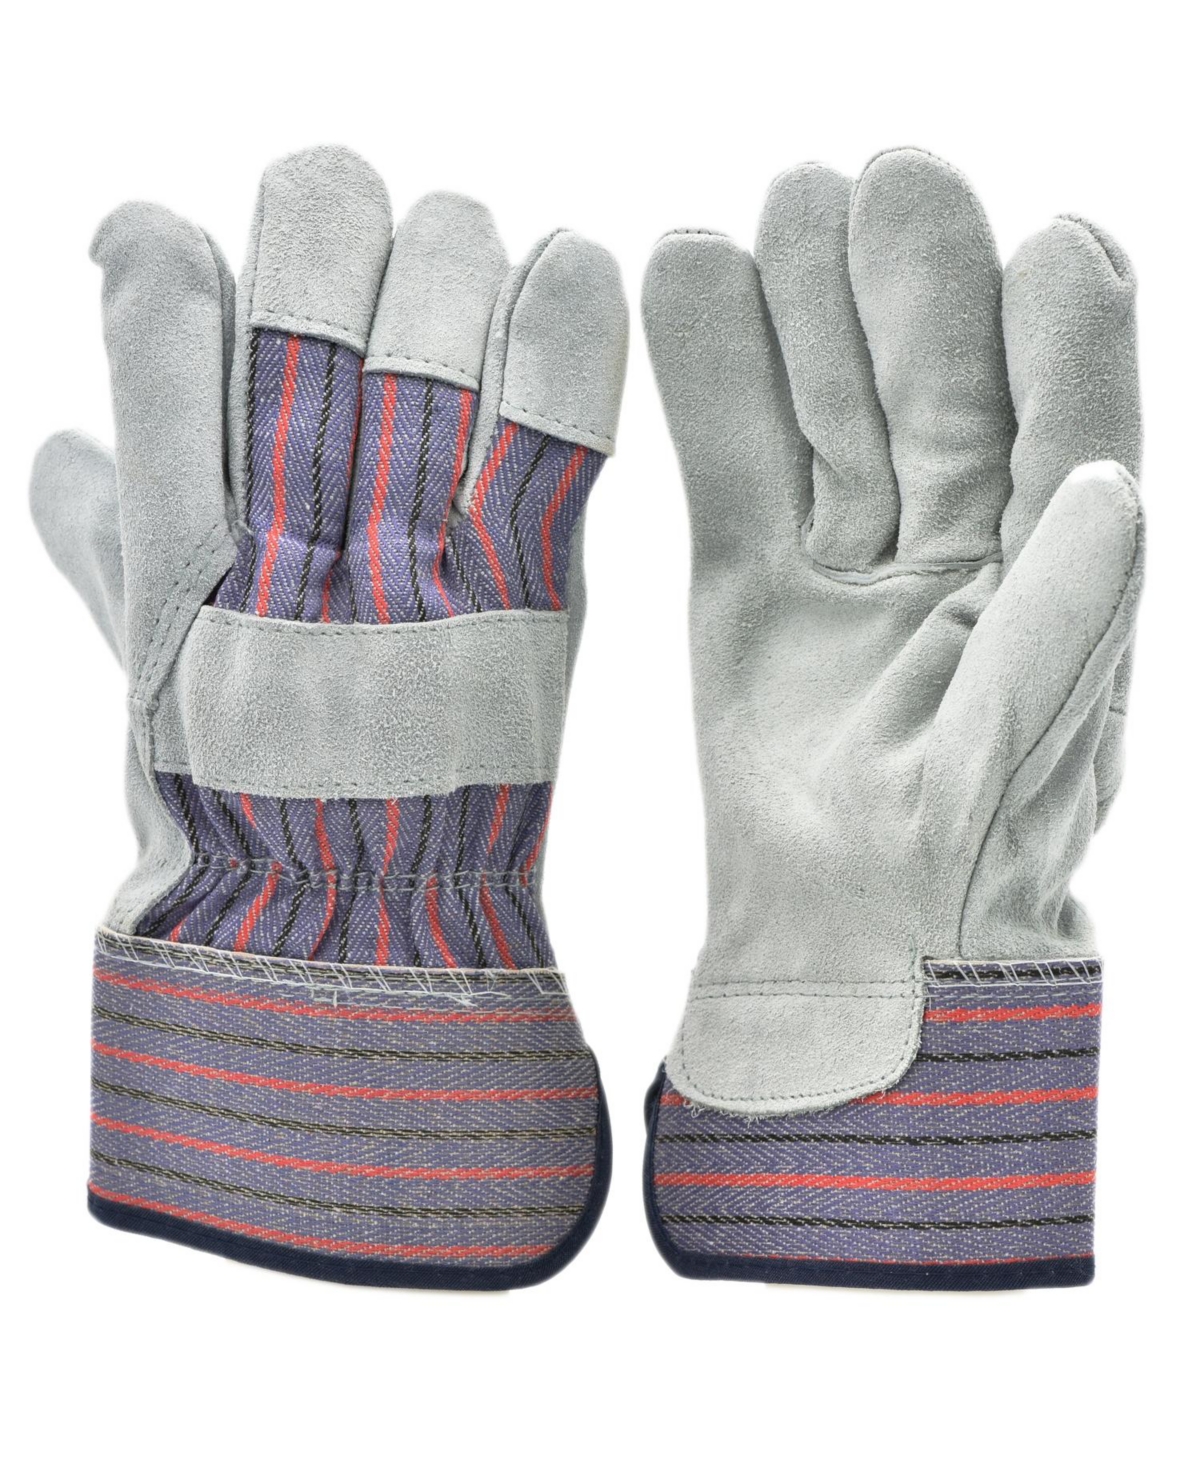 50155 Driving and Work Gloves, 5 Pairs - Grey